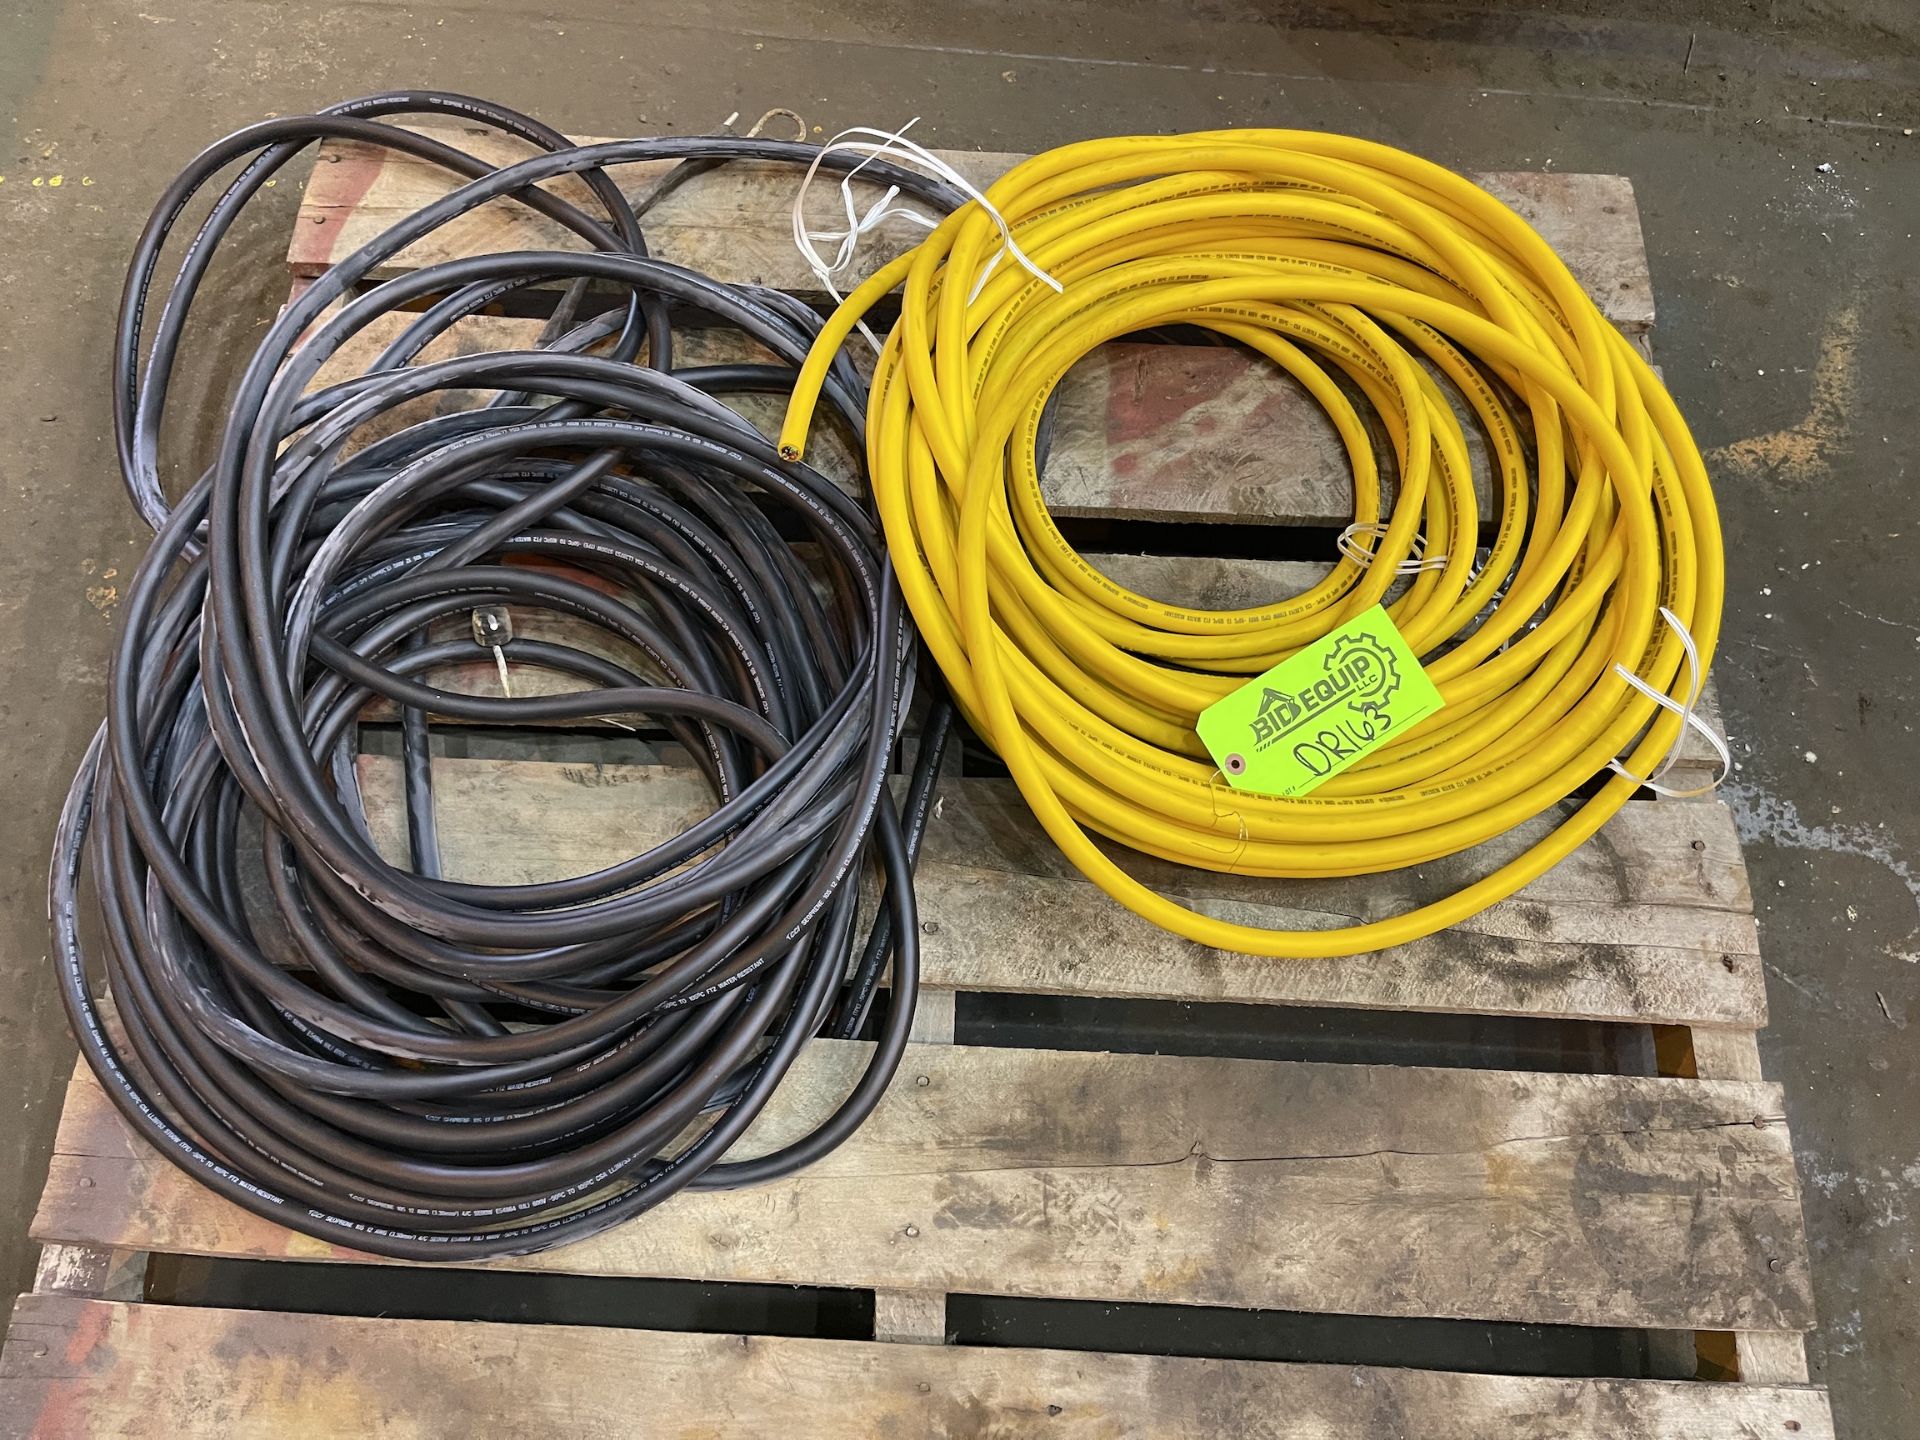 Lot of Flexible Tubing (DR163) - Lester, Pa - Image 8 of 9